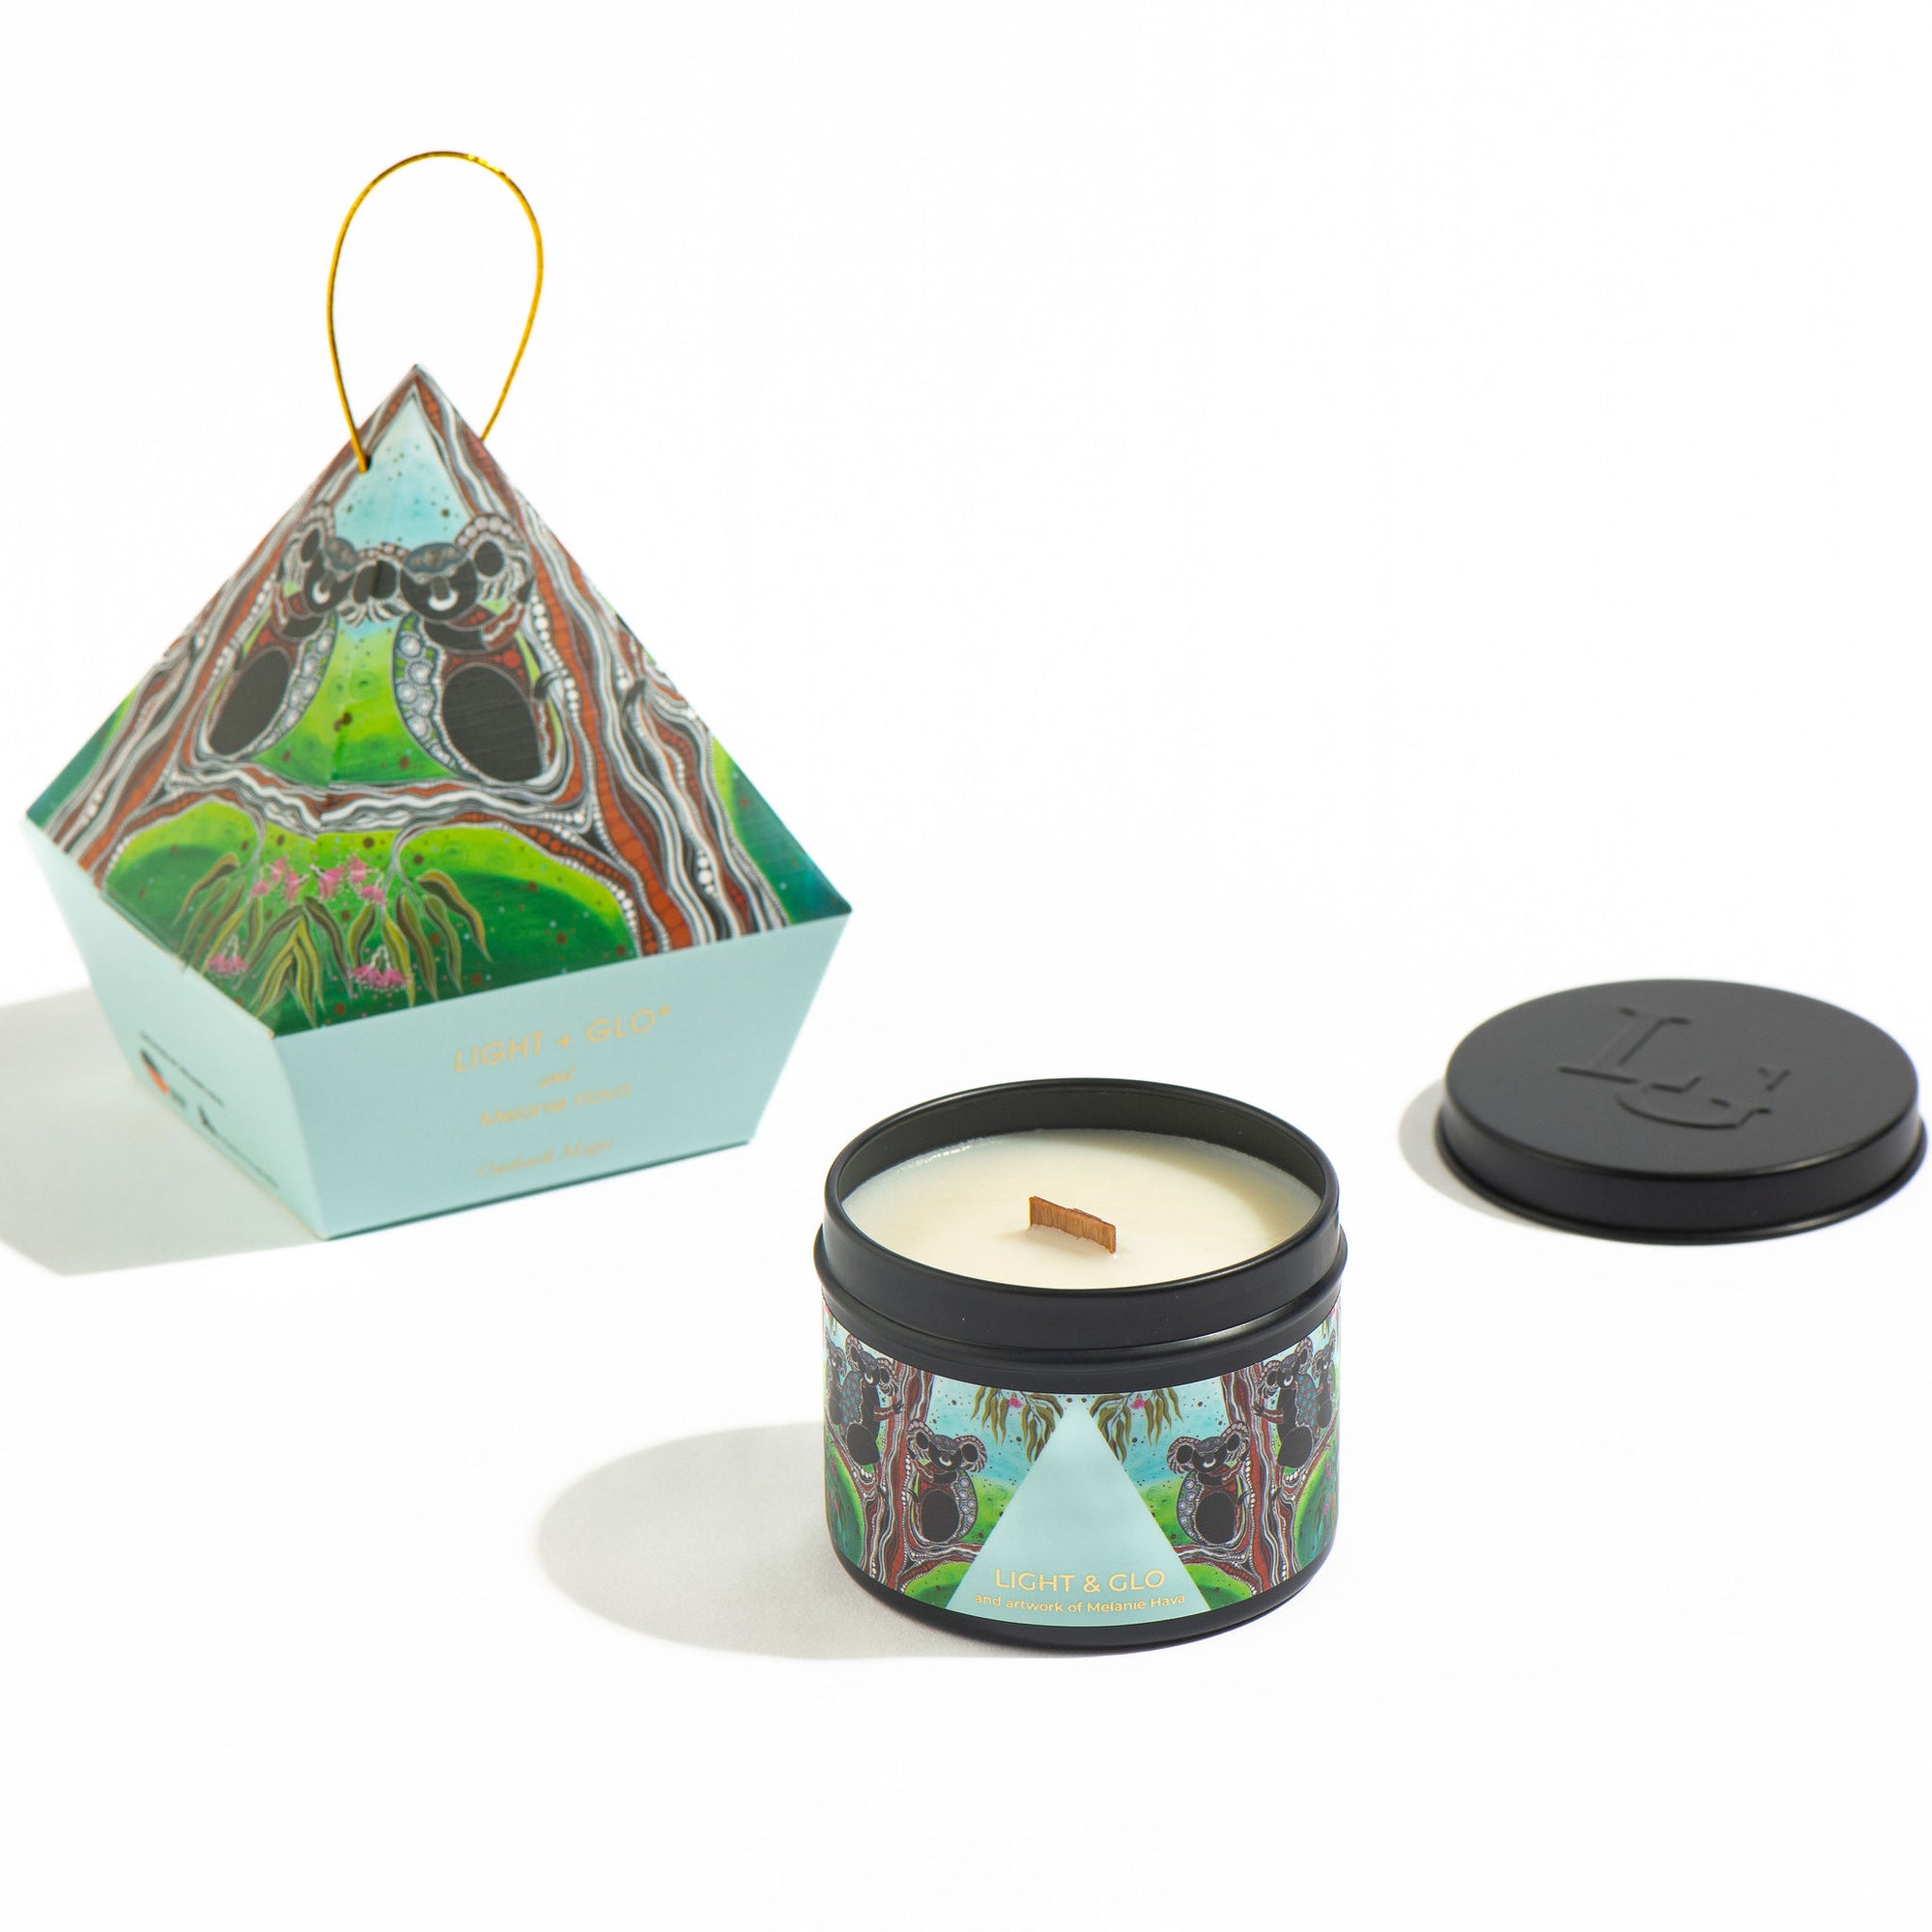 Soul Australiana Travel Candle - Outback Magic Bauble Limited Edition Candle | Luxury Candles & Home Fragrances by Light + Glo